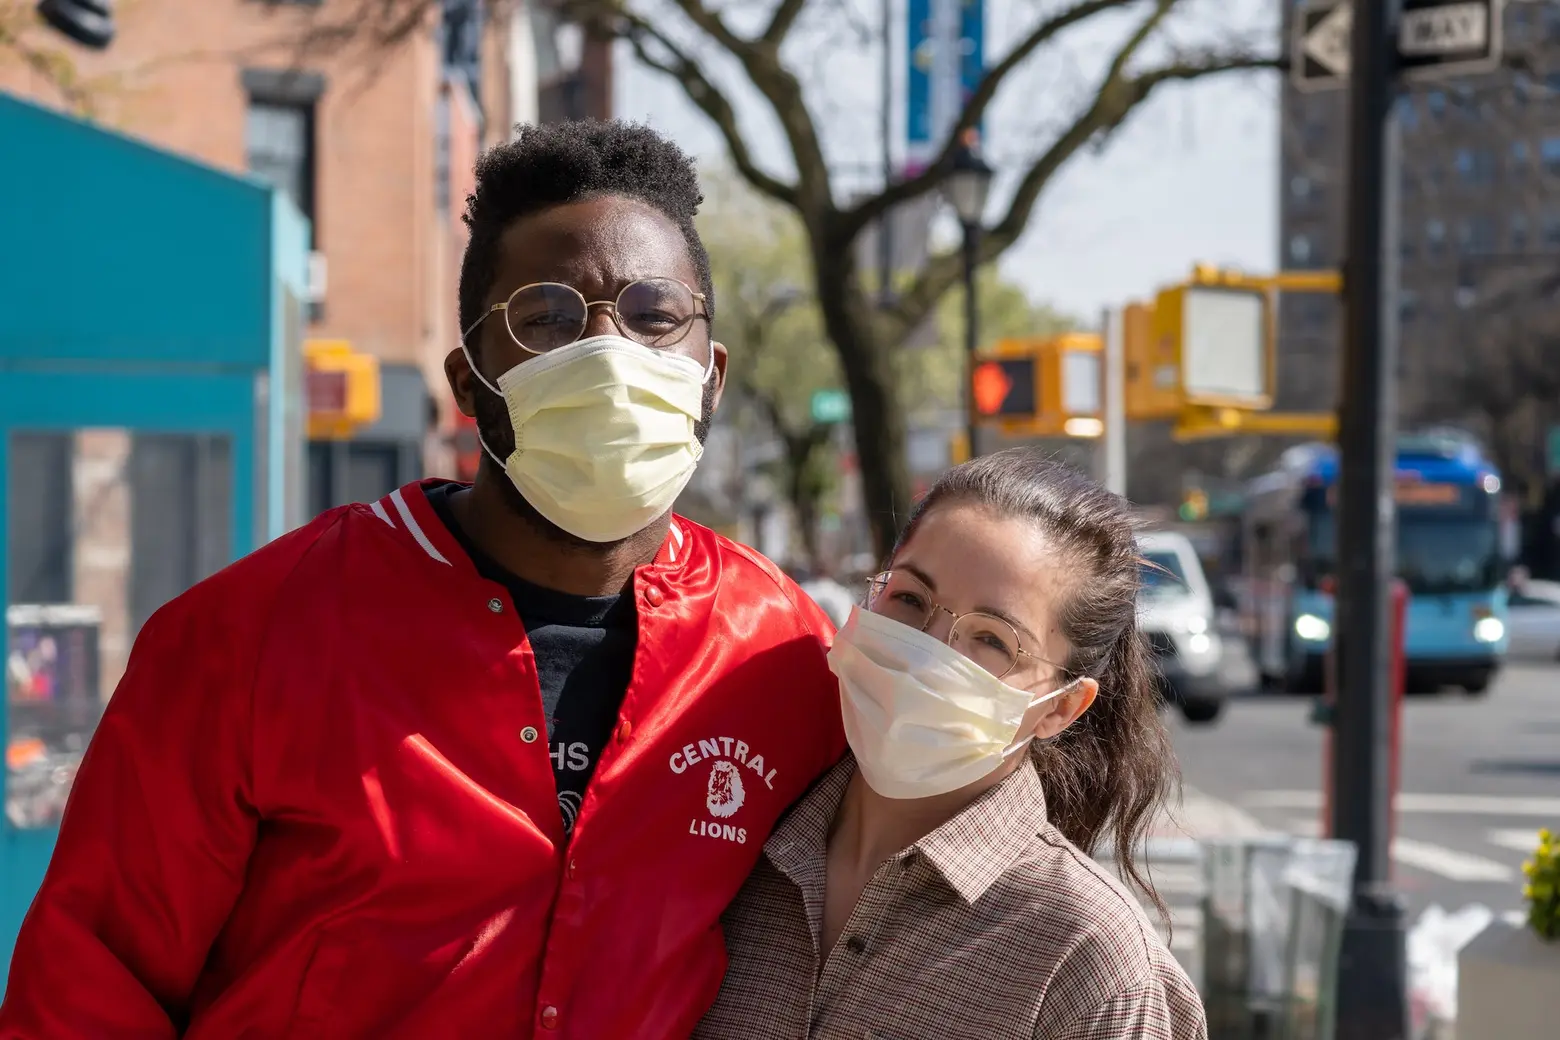 Watch the winner of New York’s mask-awareness video competition